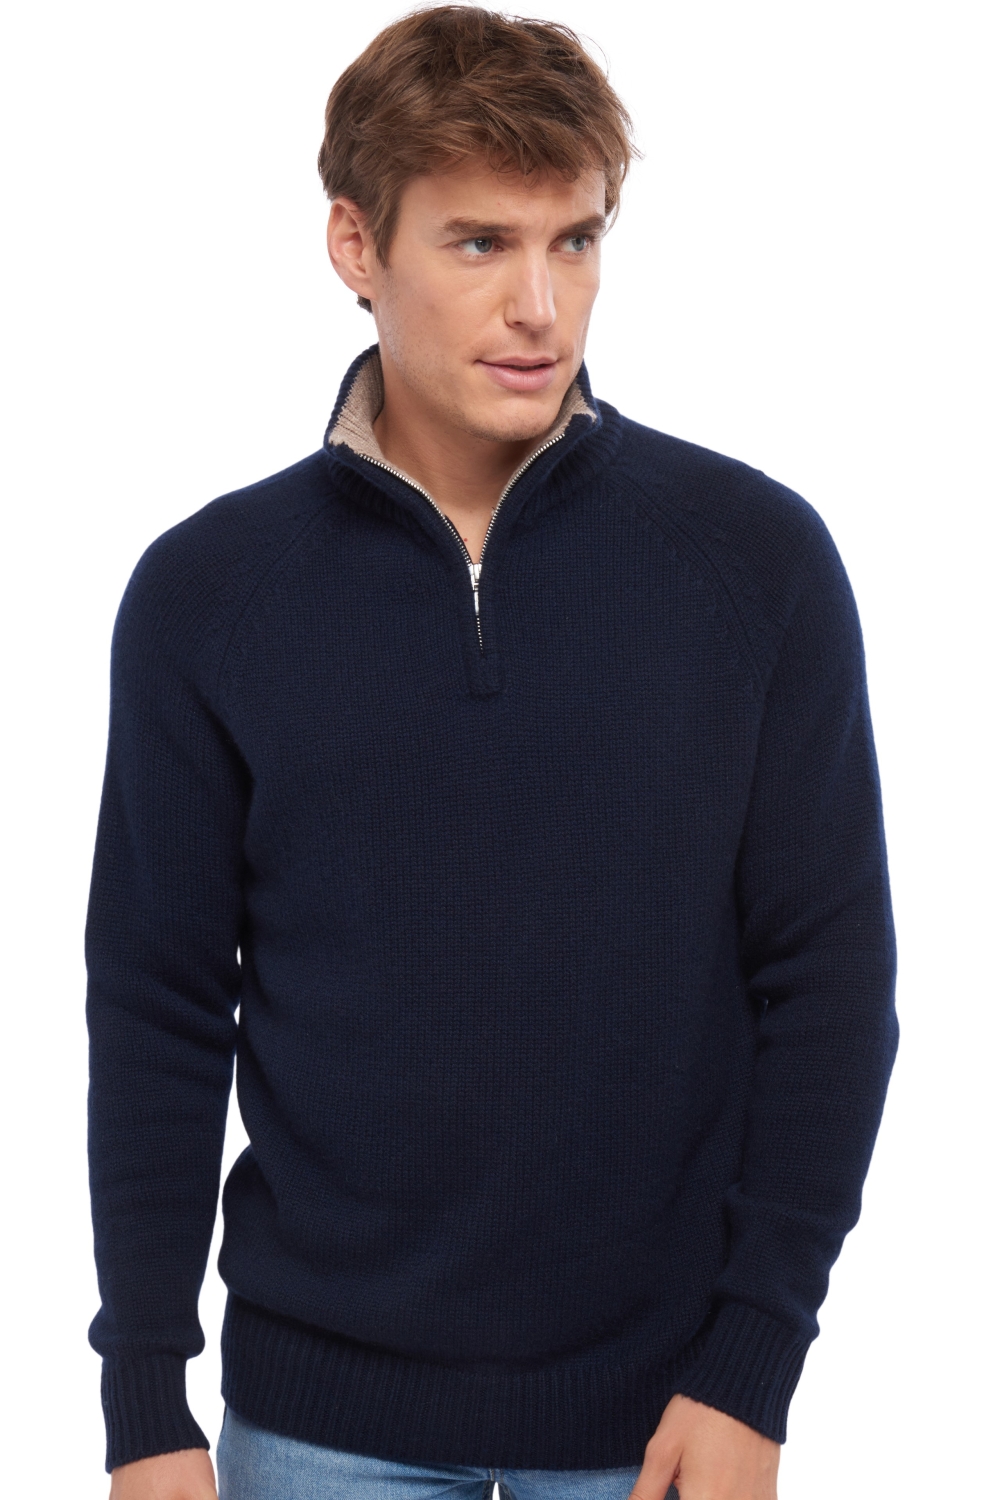 Cashmere uomo polo angers blu notte toast s